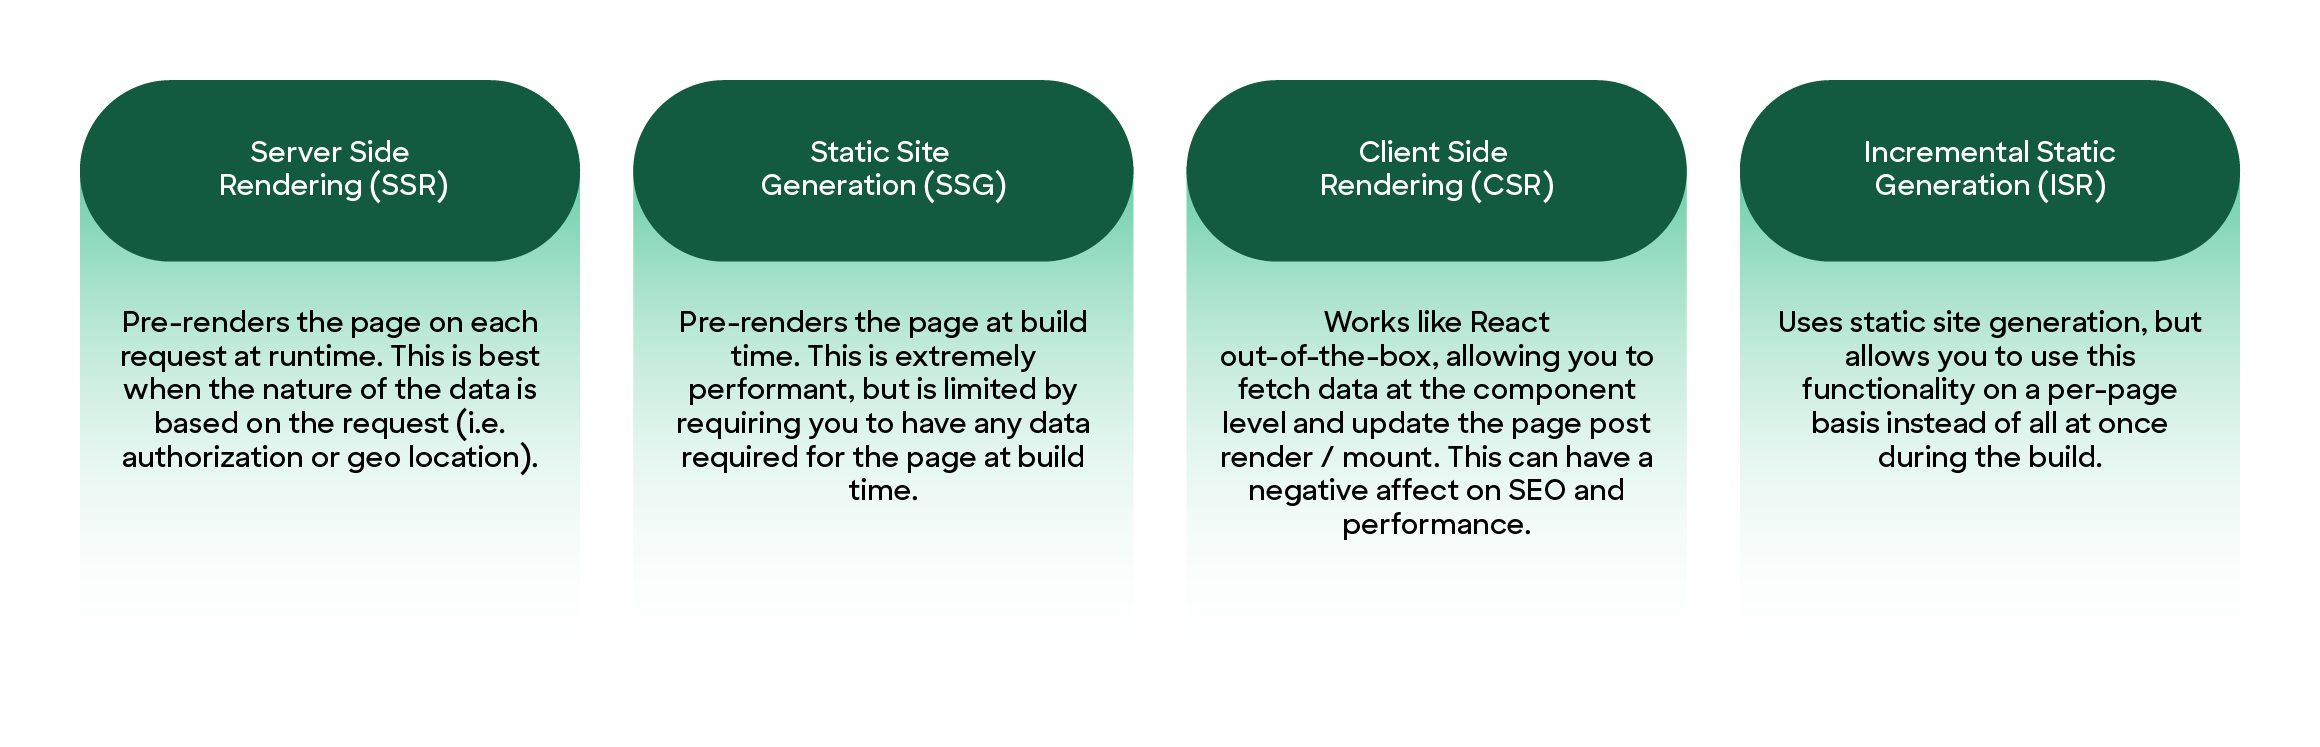 Definitions of sever-side rendering, static site generation, client-side rendering, incremental static generation